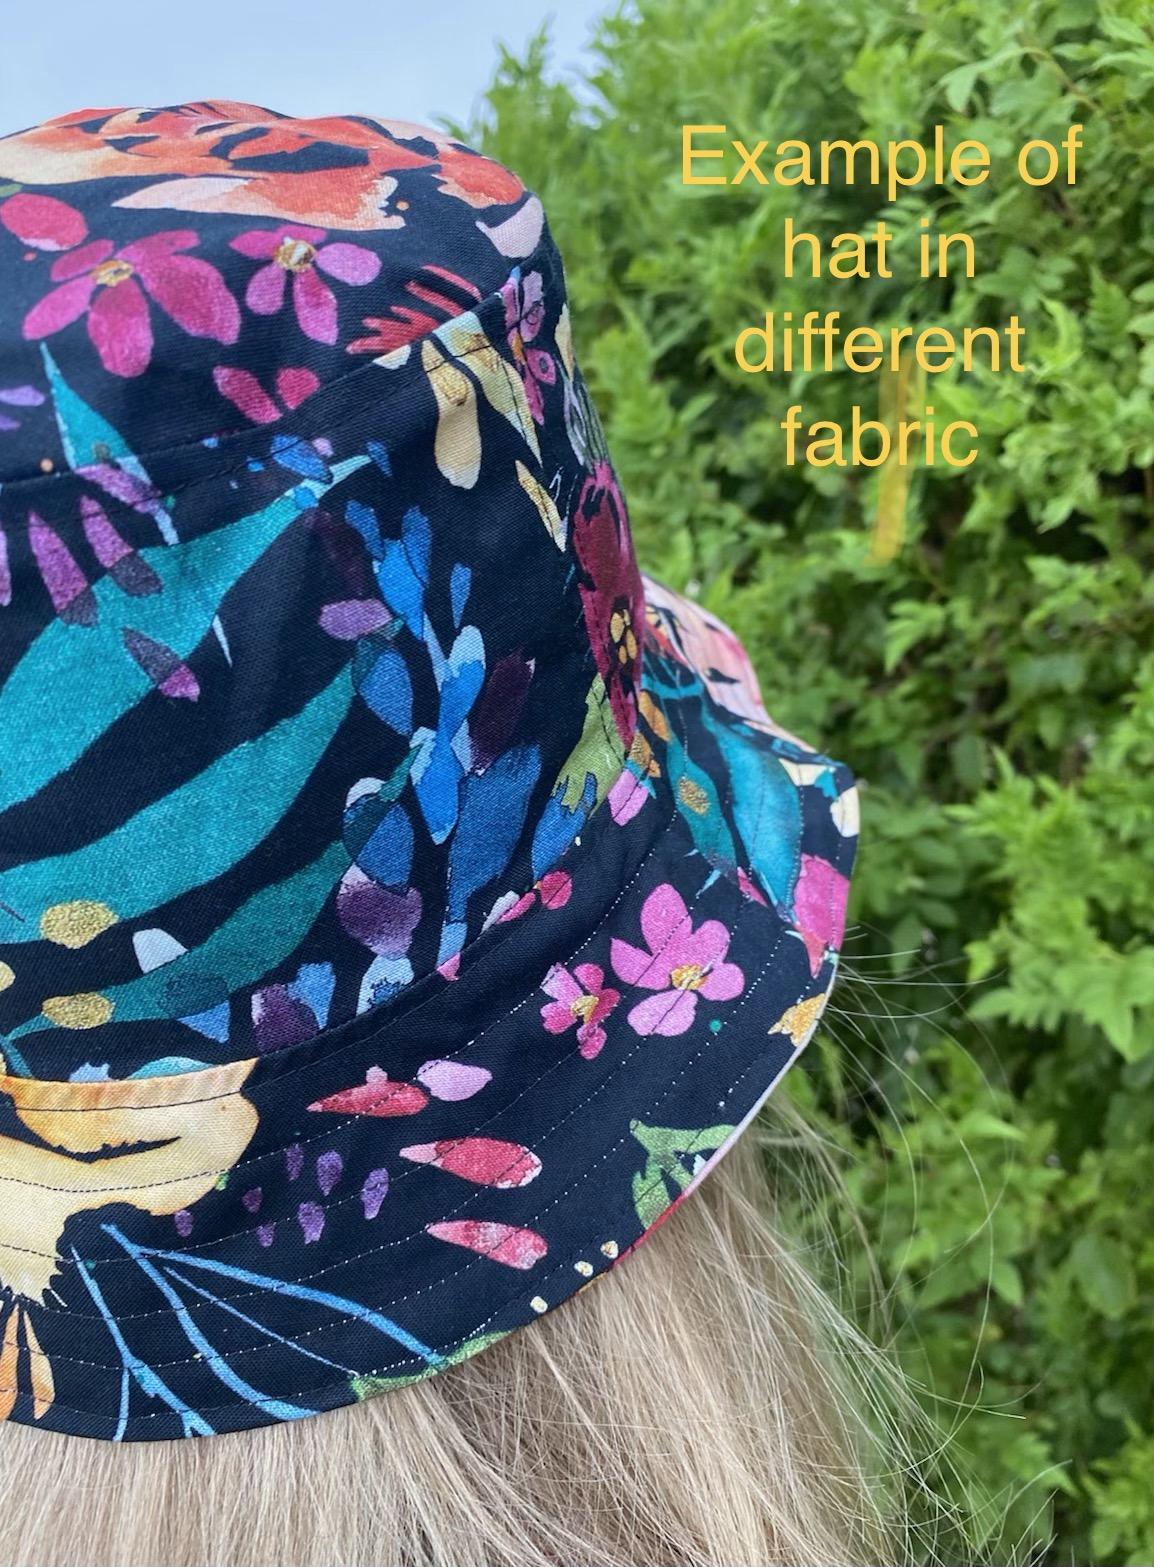 Same hat in different fabric, worn by adult woman